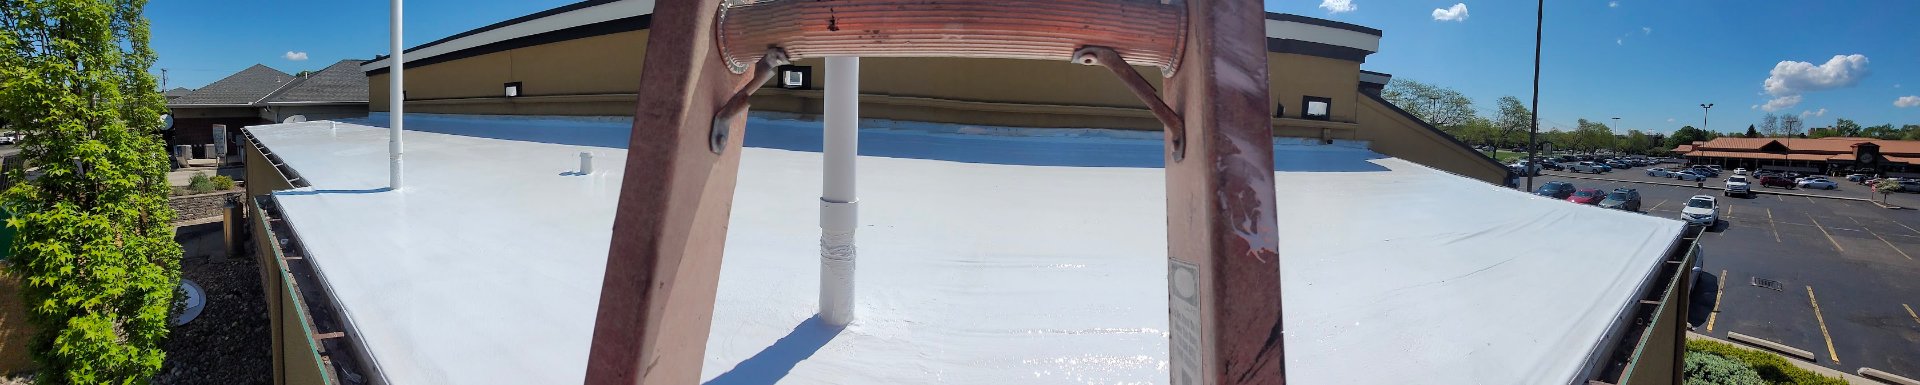 Roof Coatings | Technical Roofing | Commercial Roof Coatings